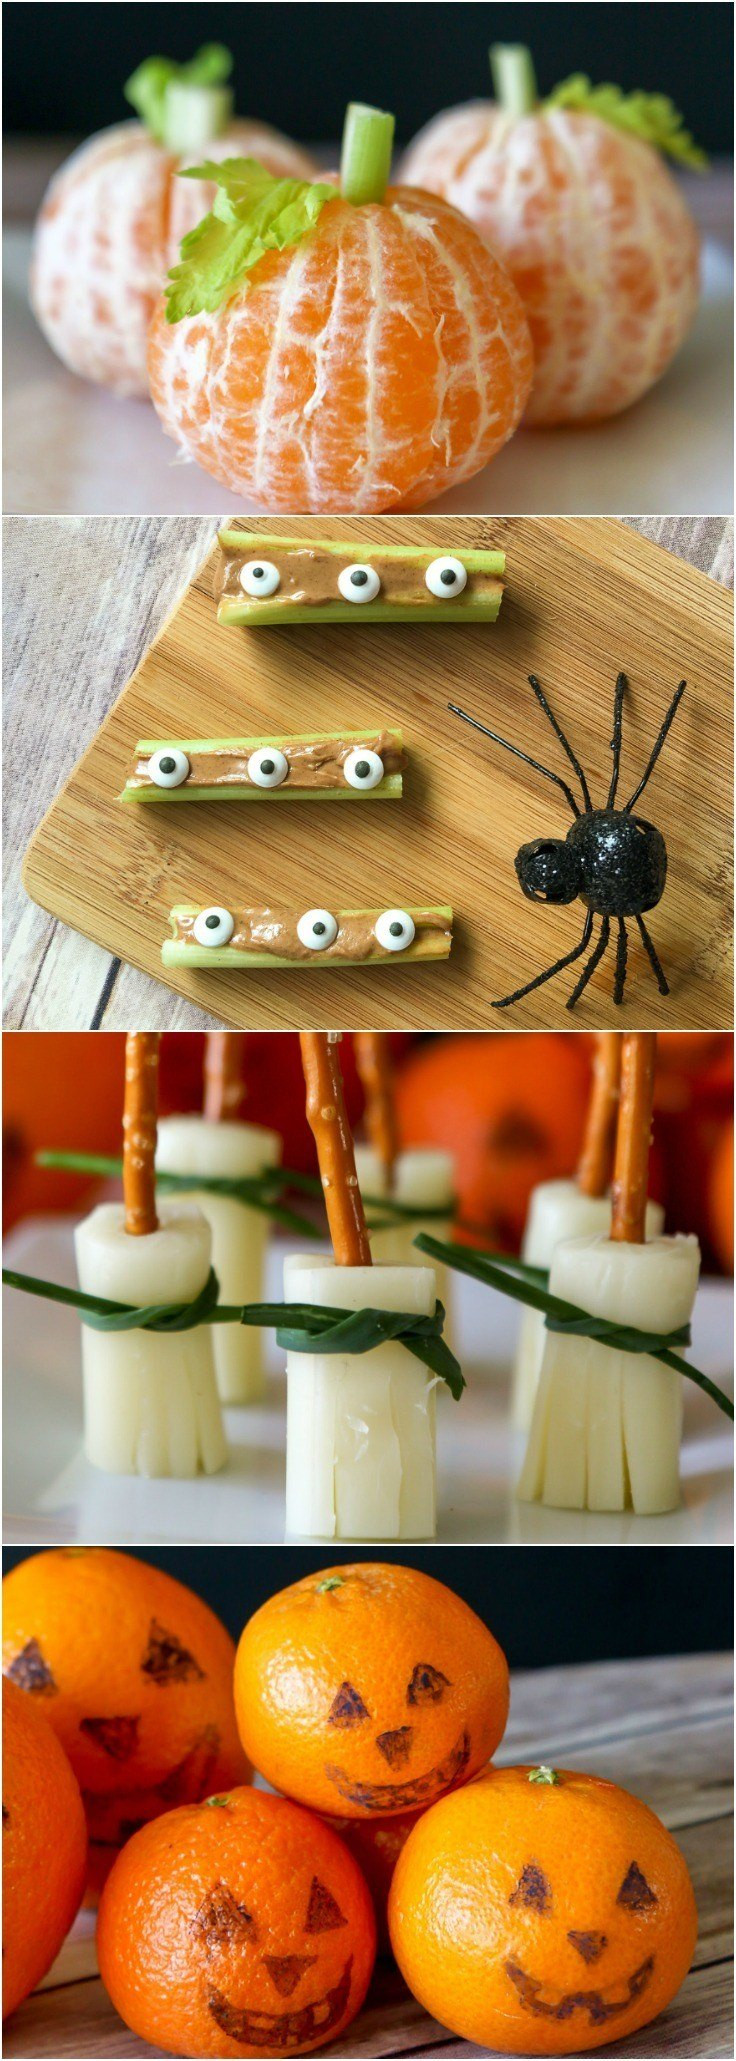 Halloween Party Foods For Kids
 5 Easy and Healthy Halloween Snacks for Kids La Jolla Mom